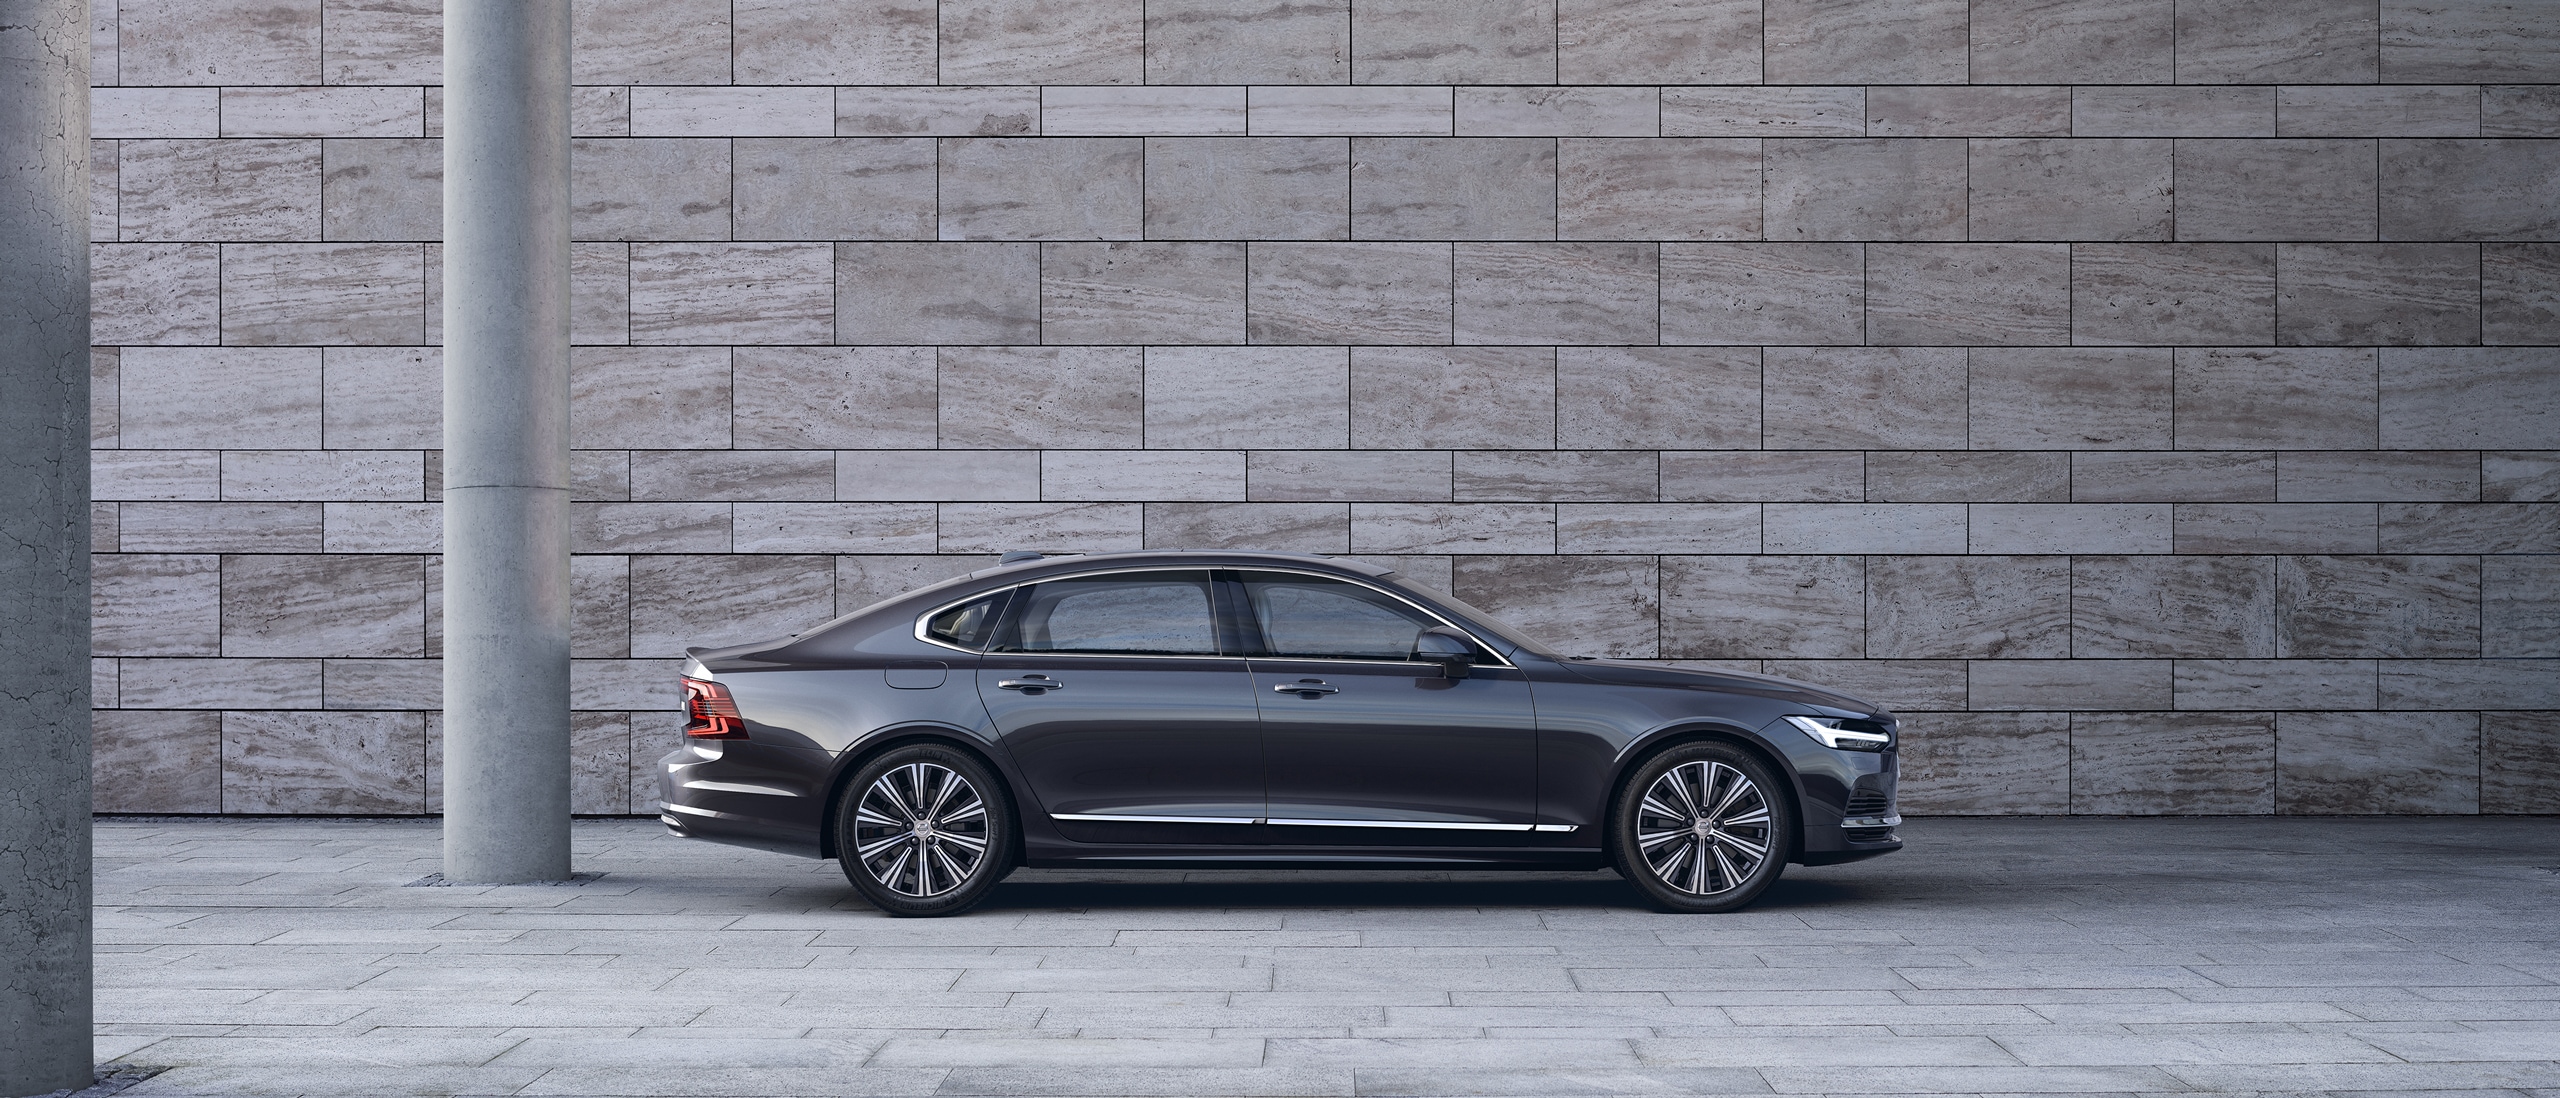 Volvo S90 seen from side parked in front of gray concrete wall.